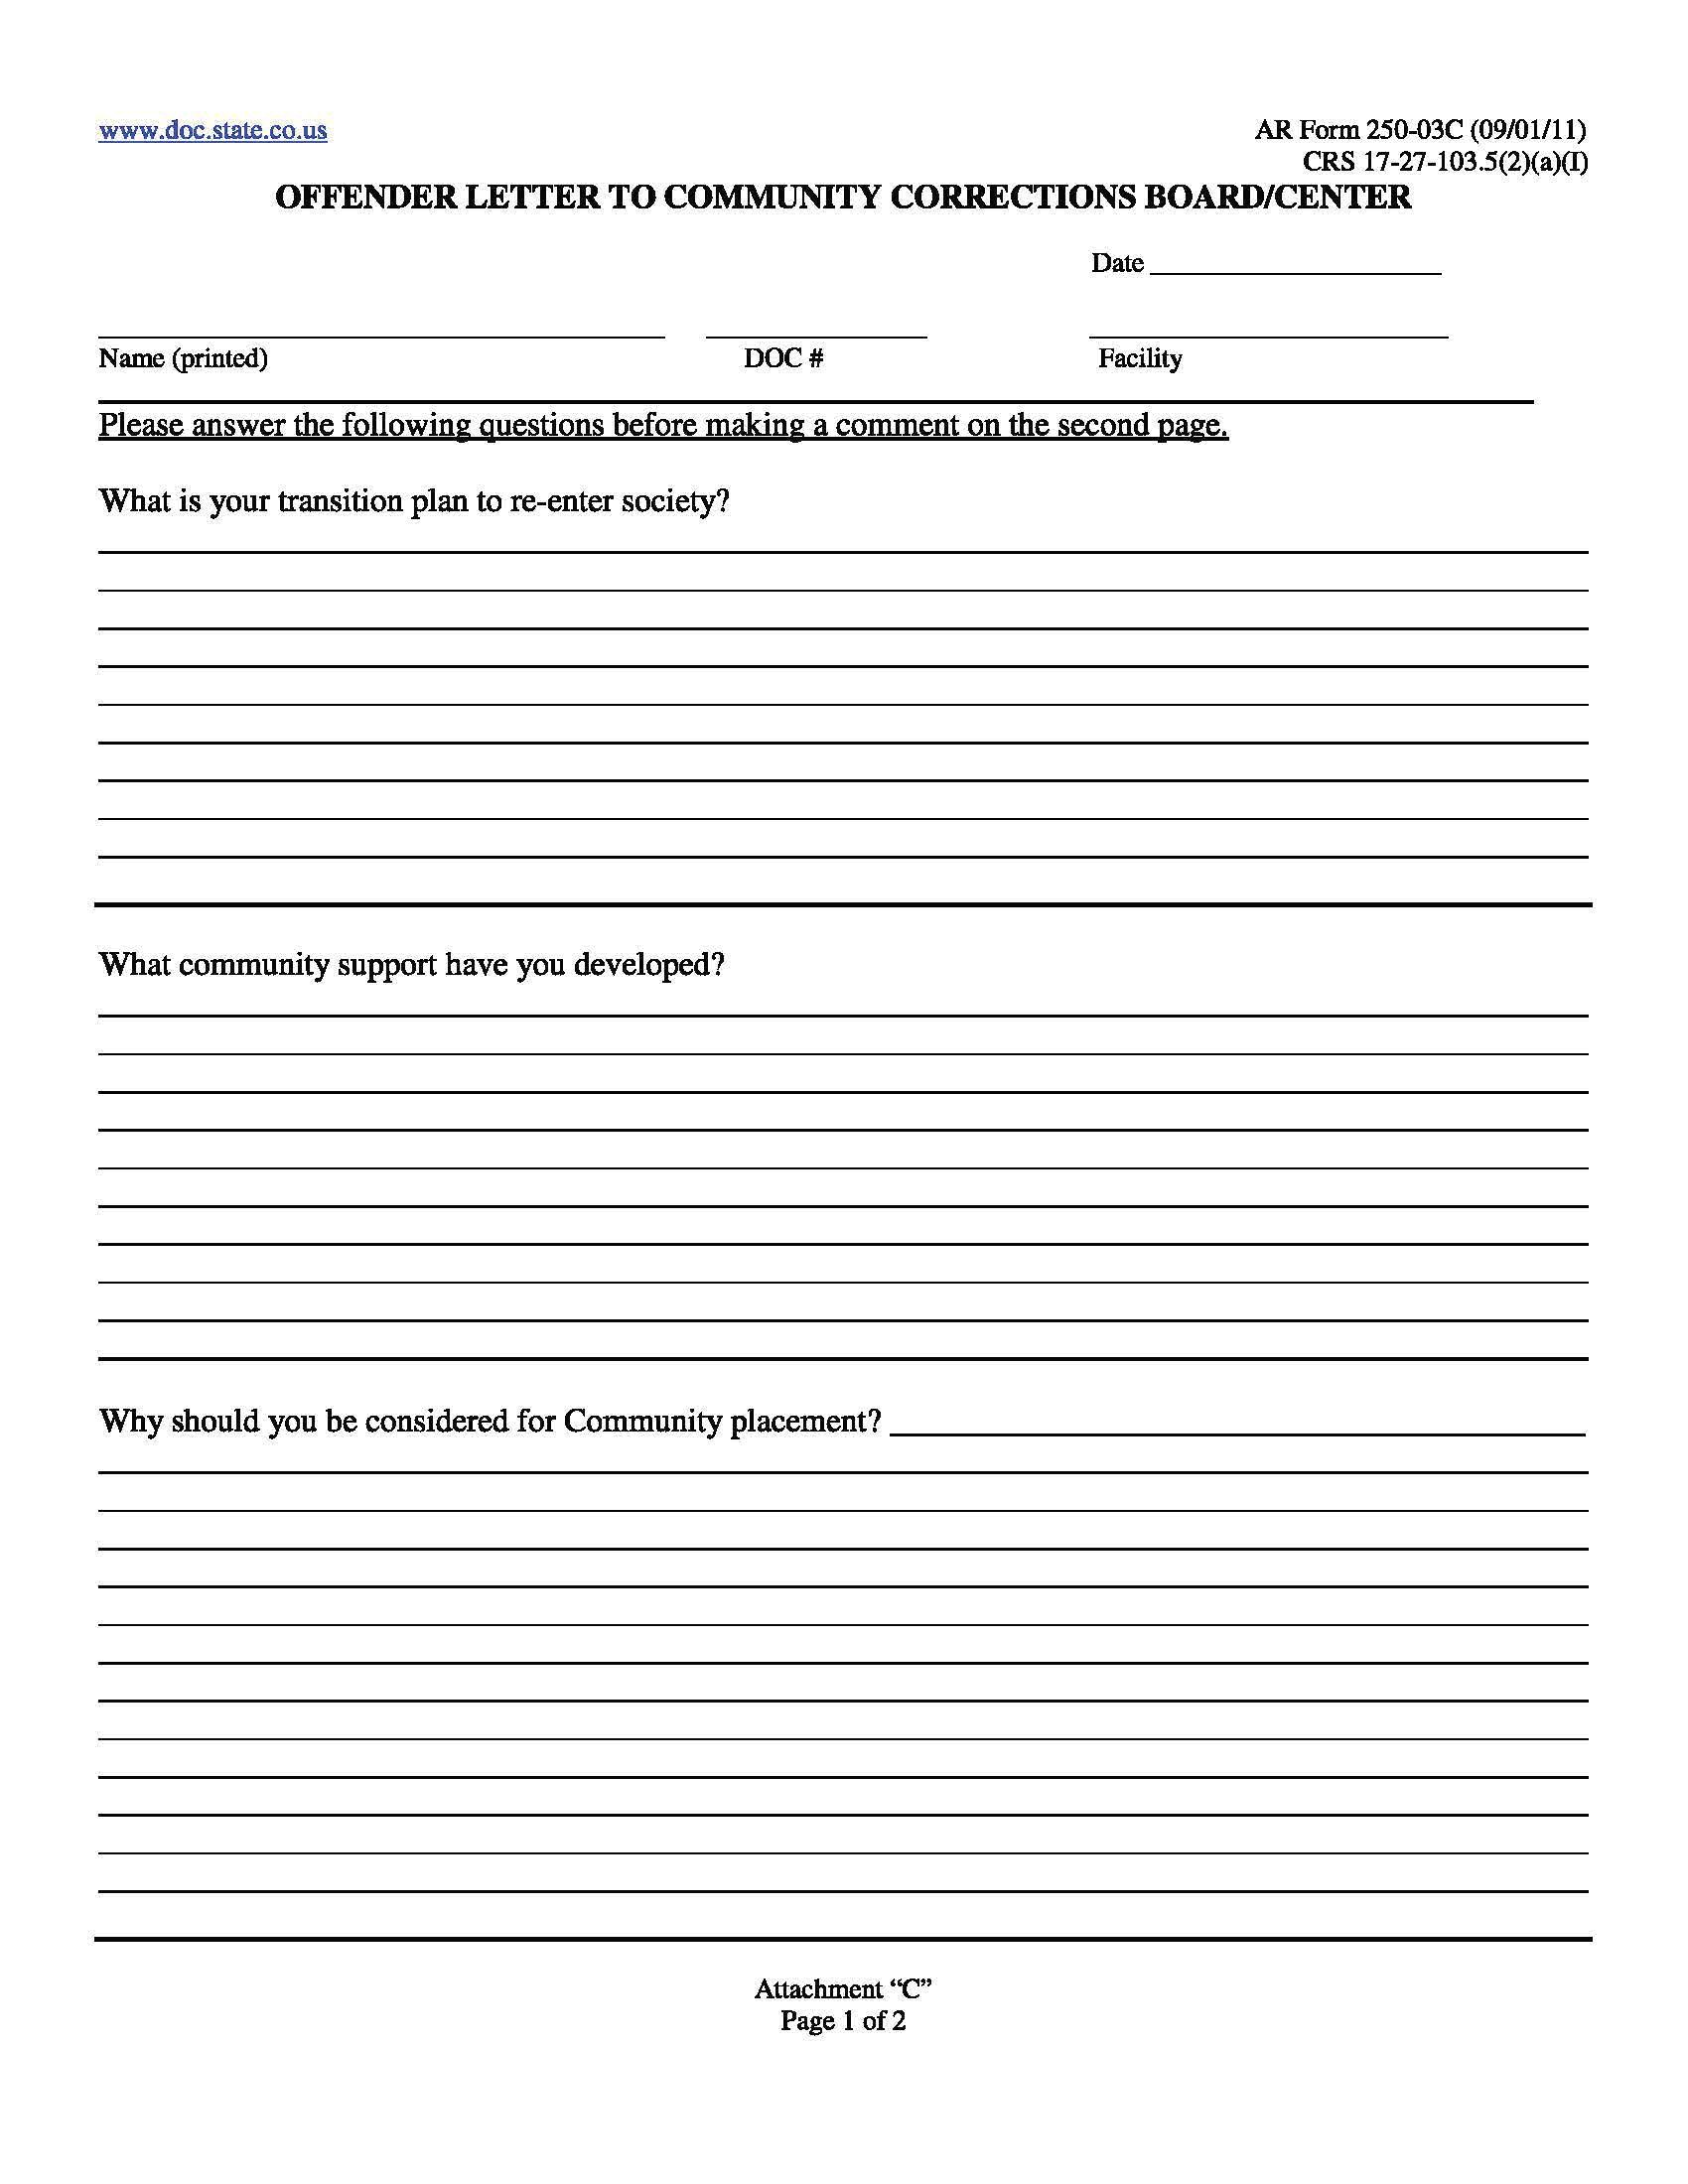 24 images of parole plan template download 4704